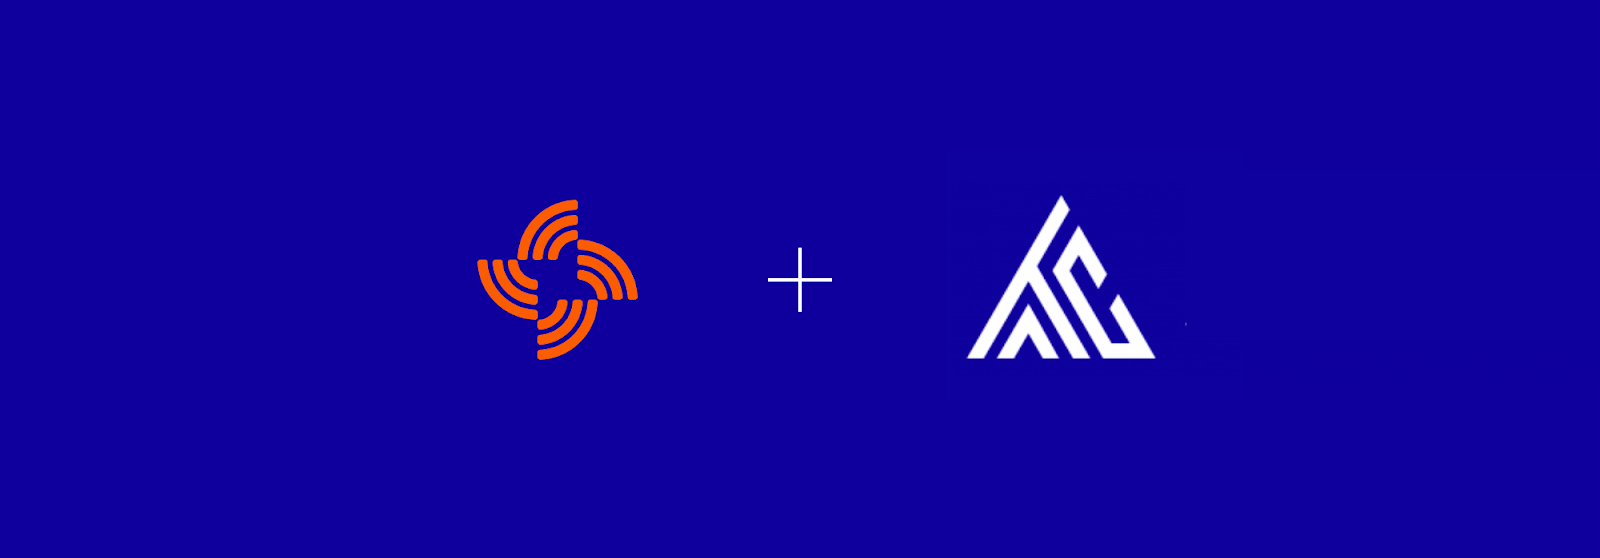 Introducing Anti-rival NFTs - the Streamr Acknowledgement Token